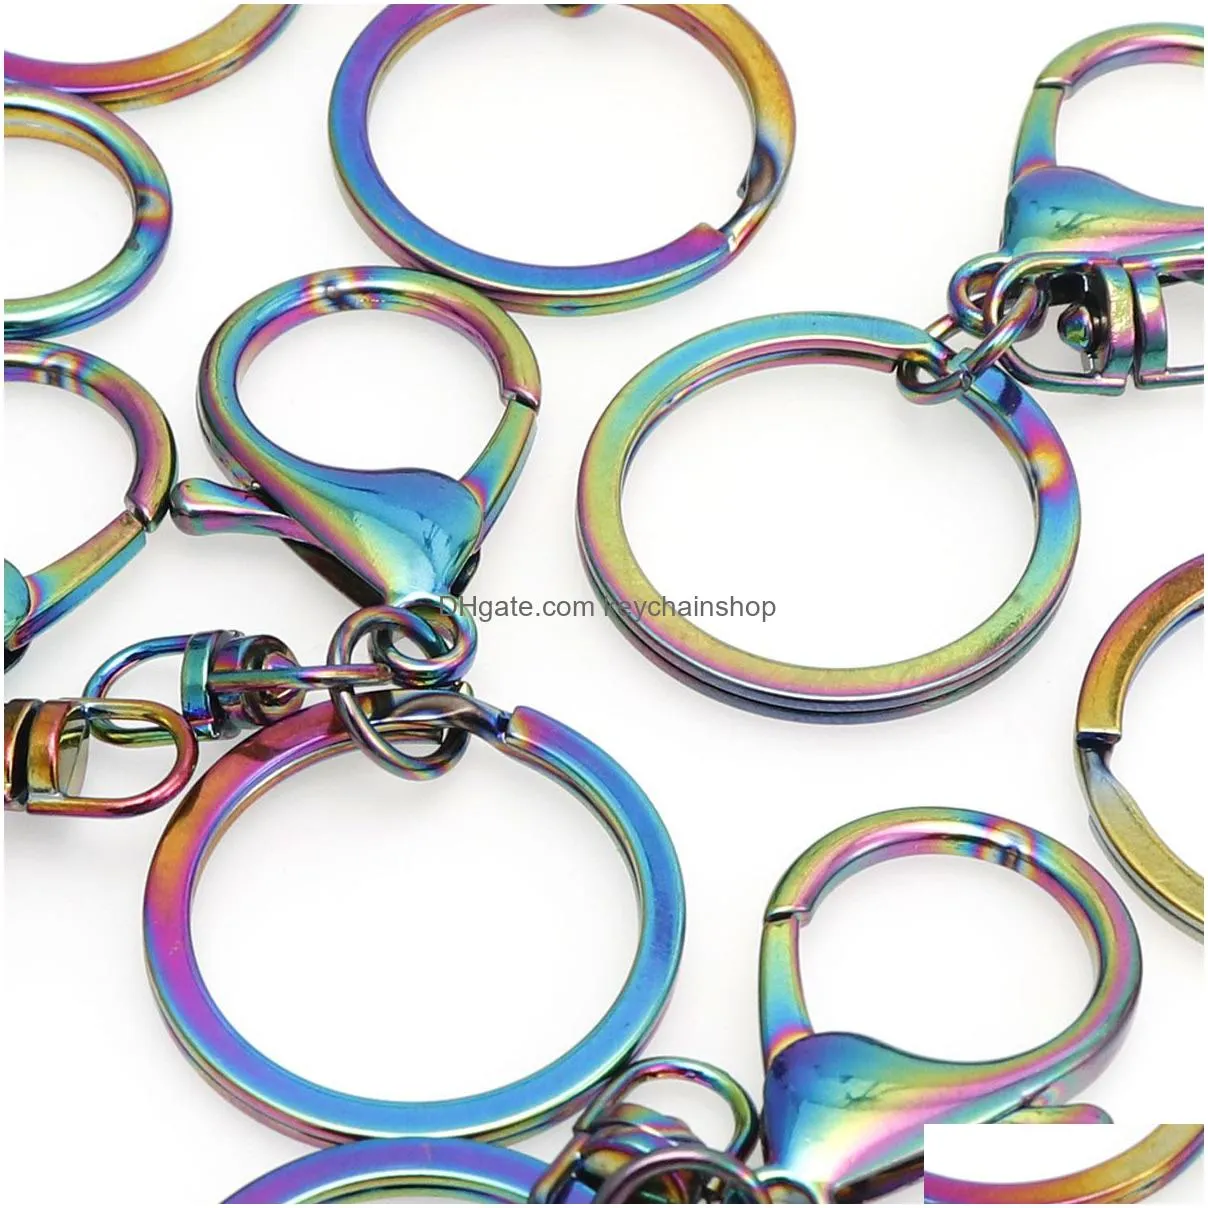 Chromatic Rainbow Keychains Metal Key Chain Ring Split Rings Uni Keyring Holder Accessories Drop Delivery Dhjld